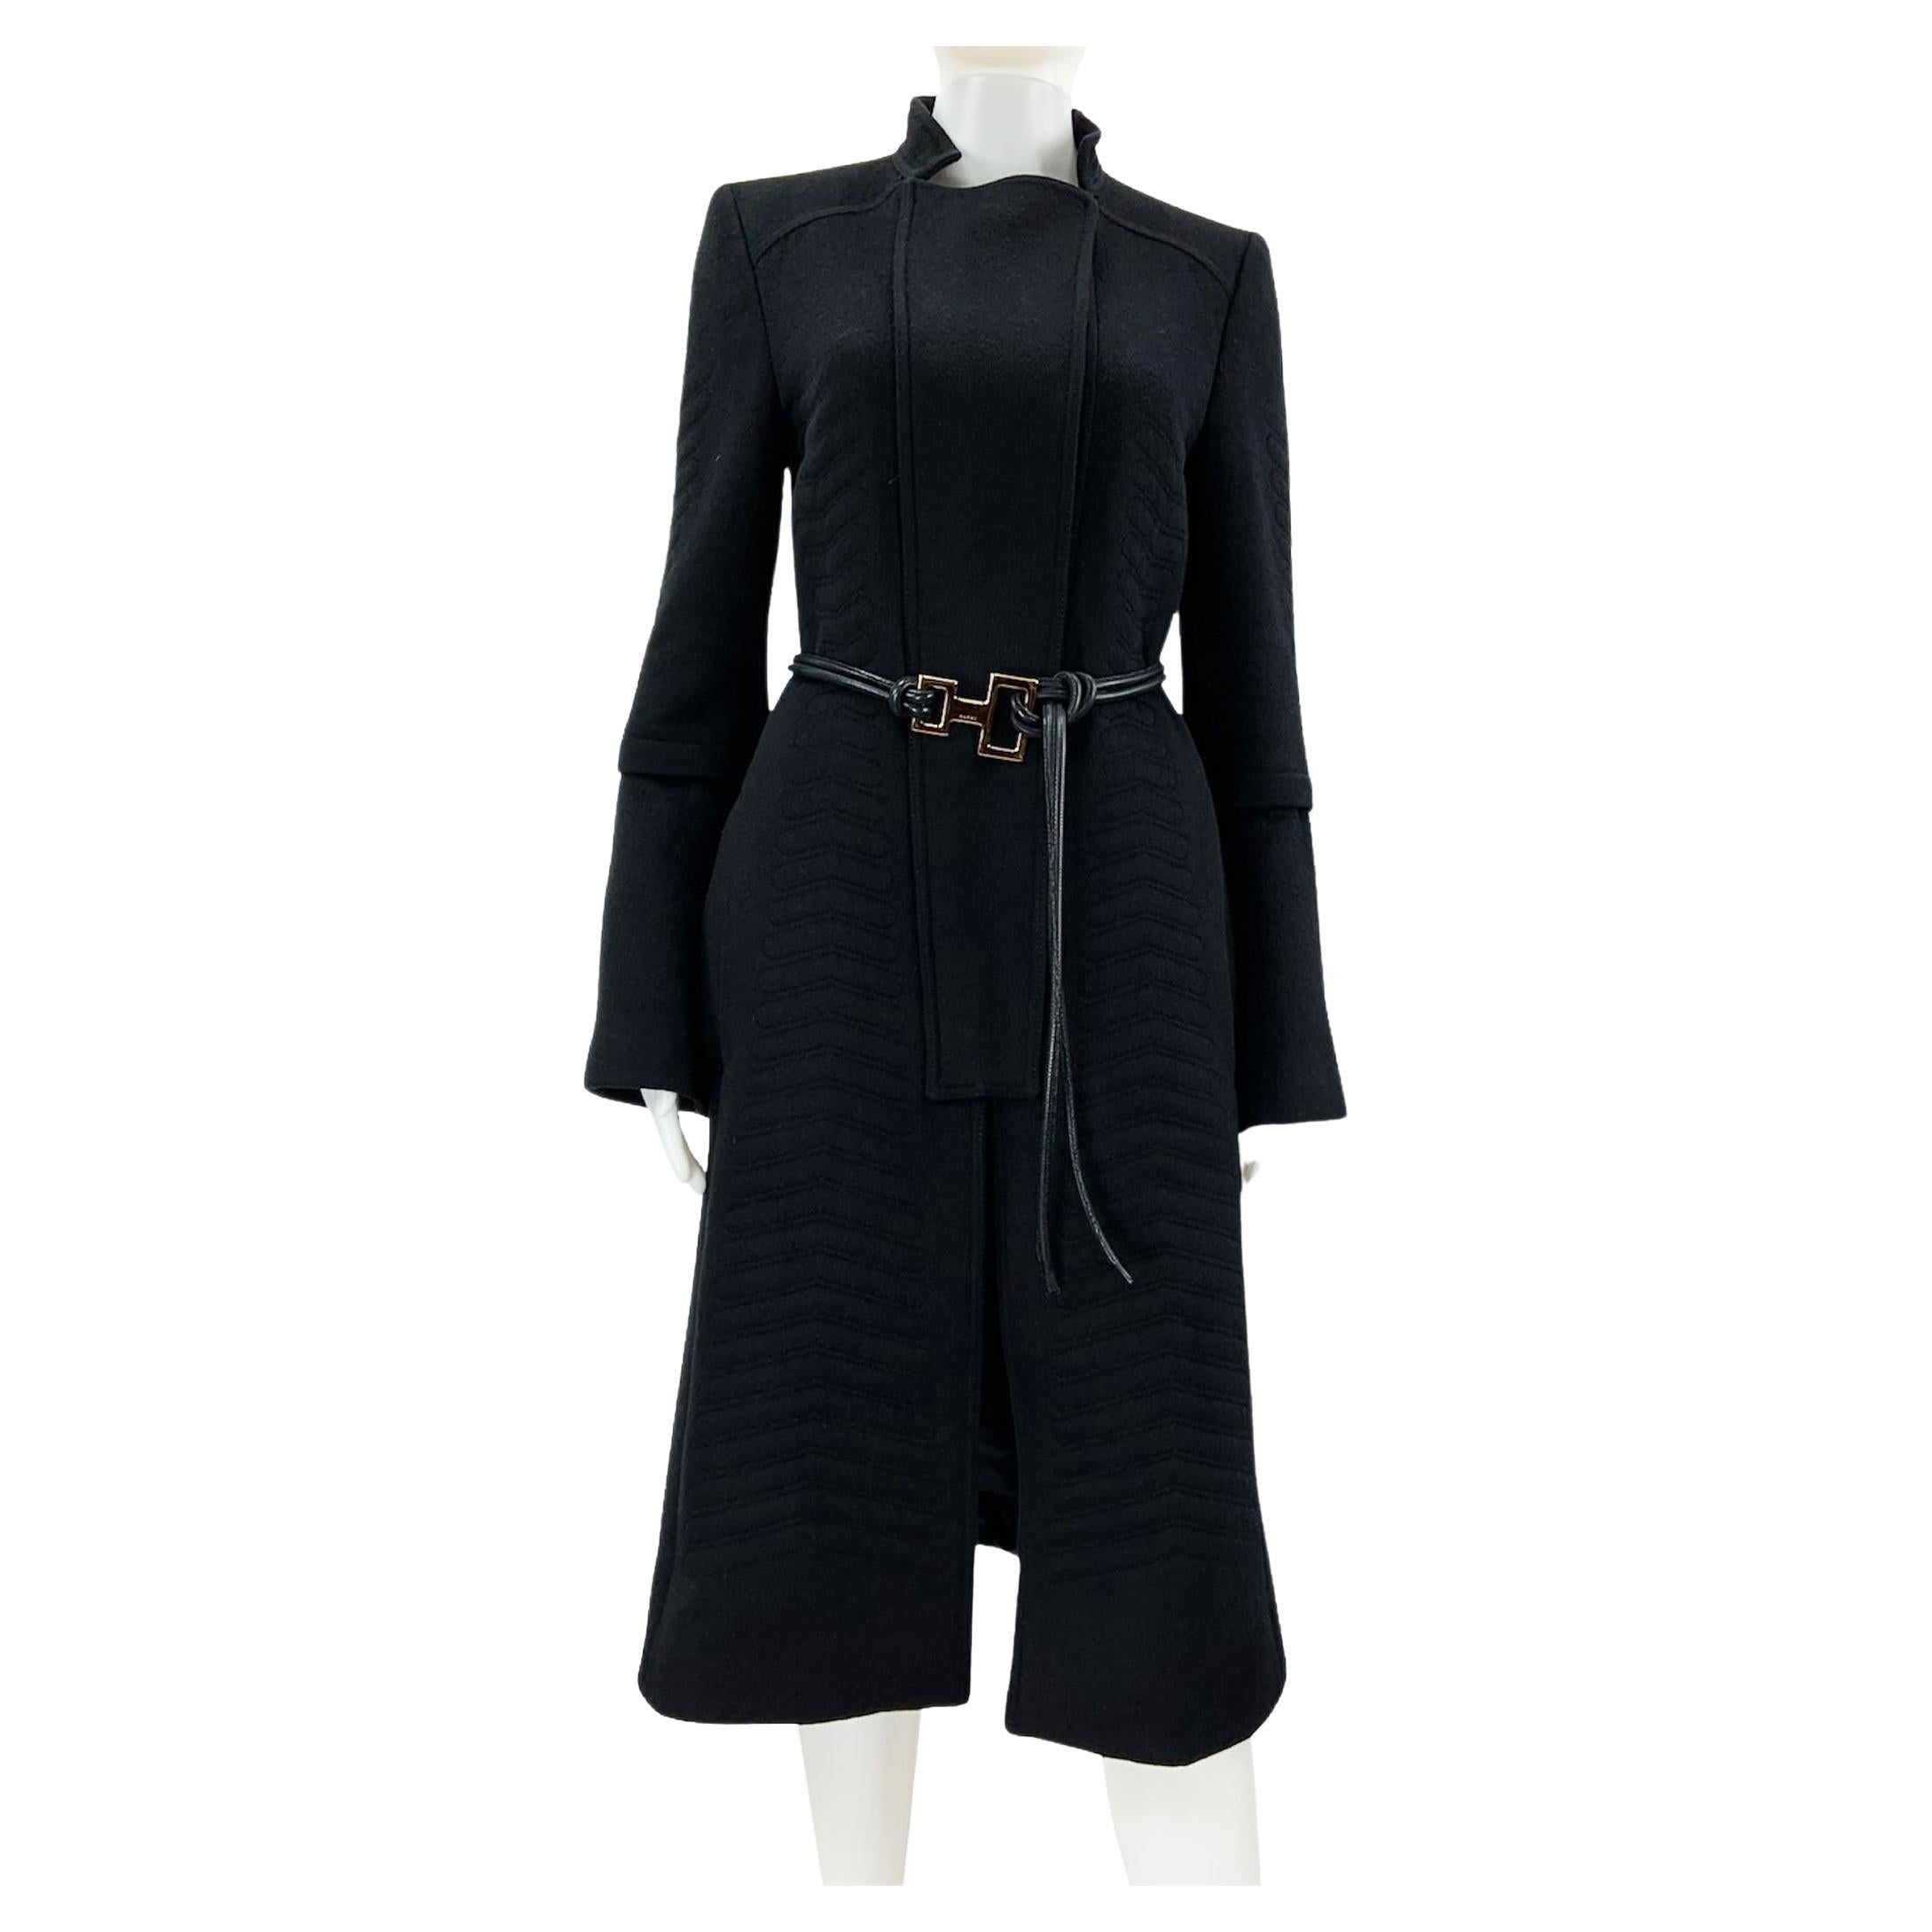 Tom Ford for Gucci F/W 2004 Black Angora Wool Chevron Pattern Coat with Belt  42 For Sale